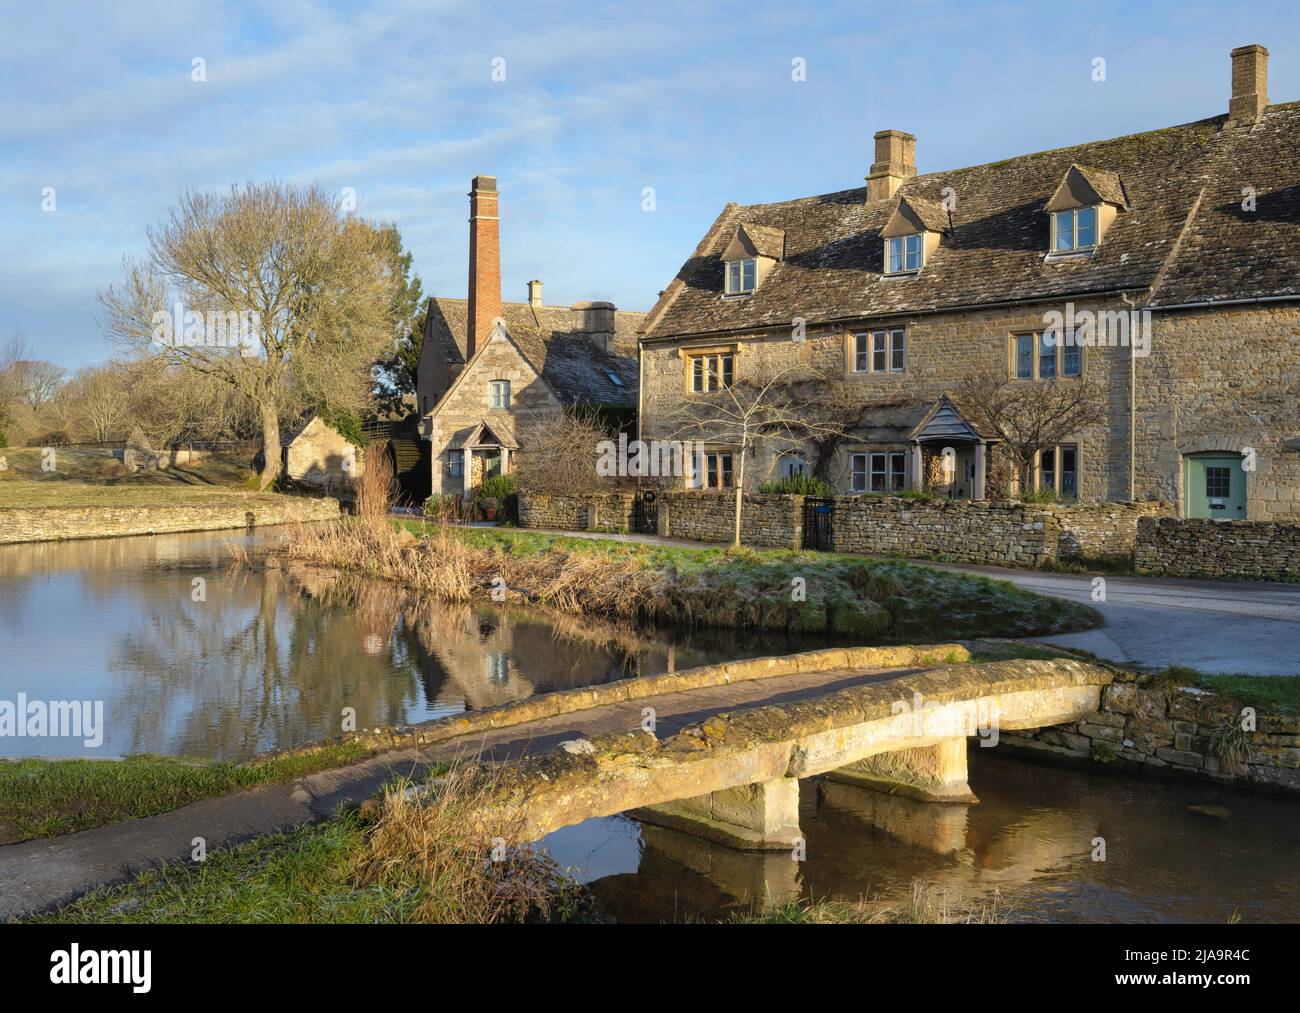 Die alte Mühle in Lower Slaughter, Cotswolds, Gloucestershire, England. Stockfoto